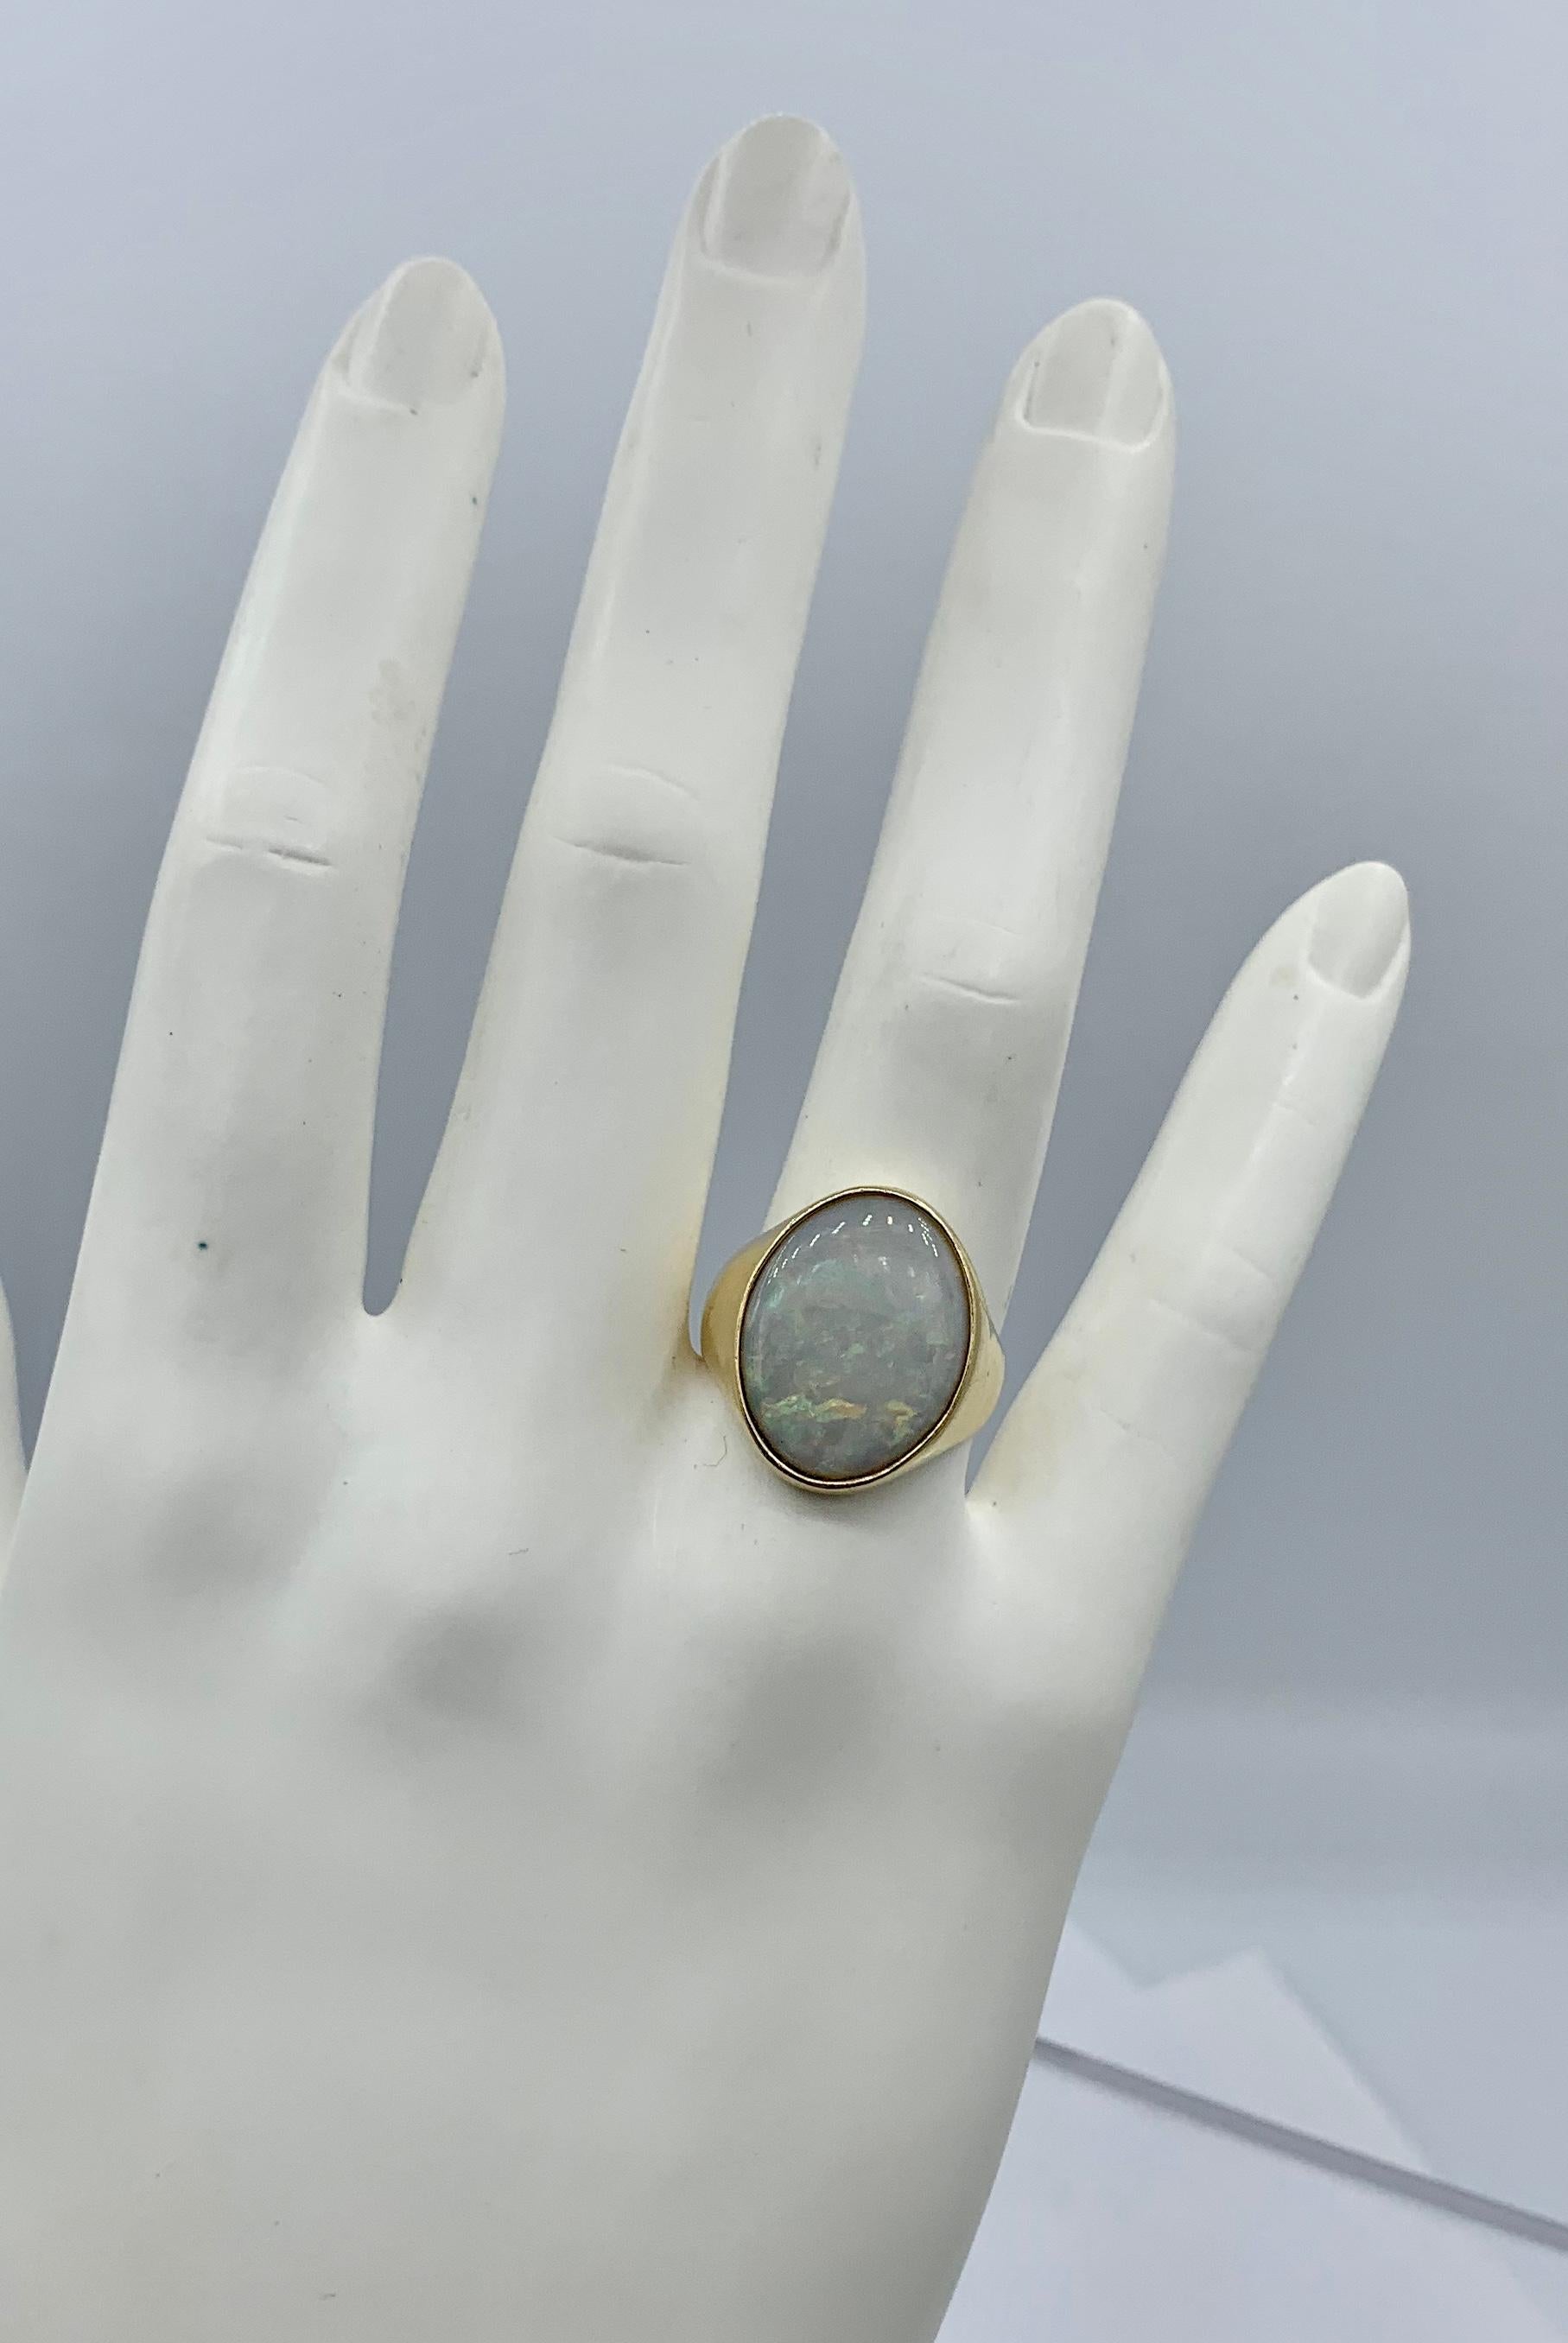 THIS IS A WONDERFUL RETRO MID-CENTURY MODERN FOUR CARAT OPAL RING IN 14K YELLOW GOLD WITH A STUNNING OVAL OPAL CABOCHON GEM.
The effect of the gorgeous natural opal in the classic mid-century modern design in 14 Karat yellow gold create a magical